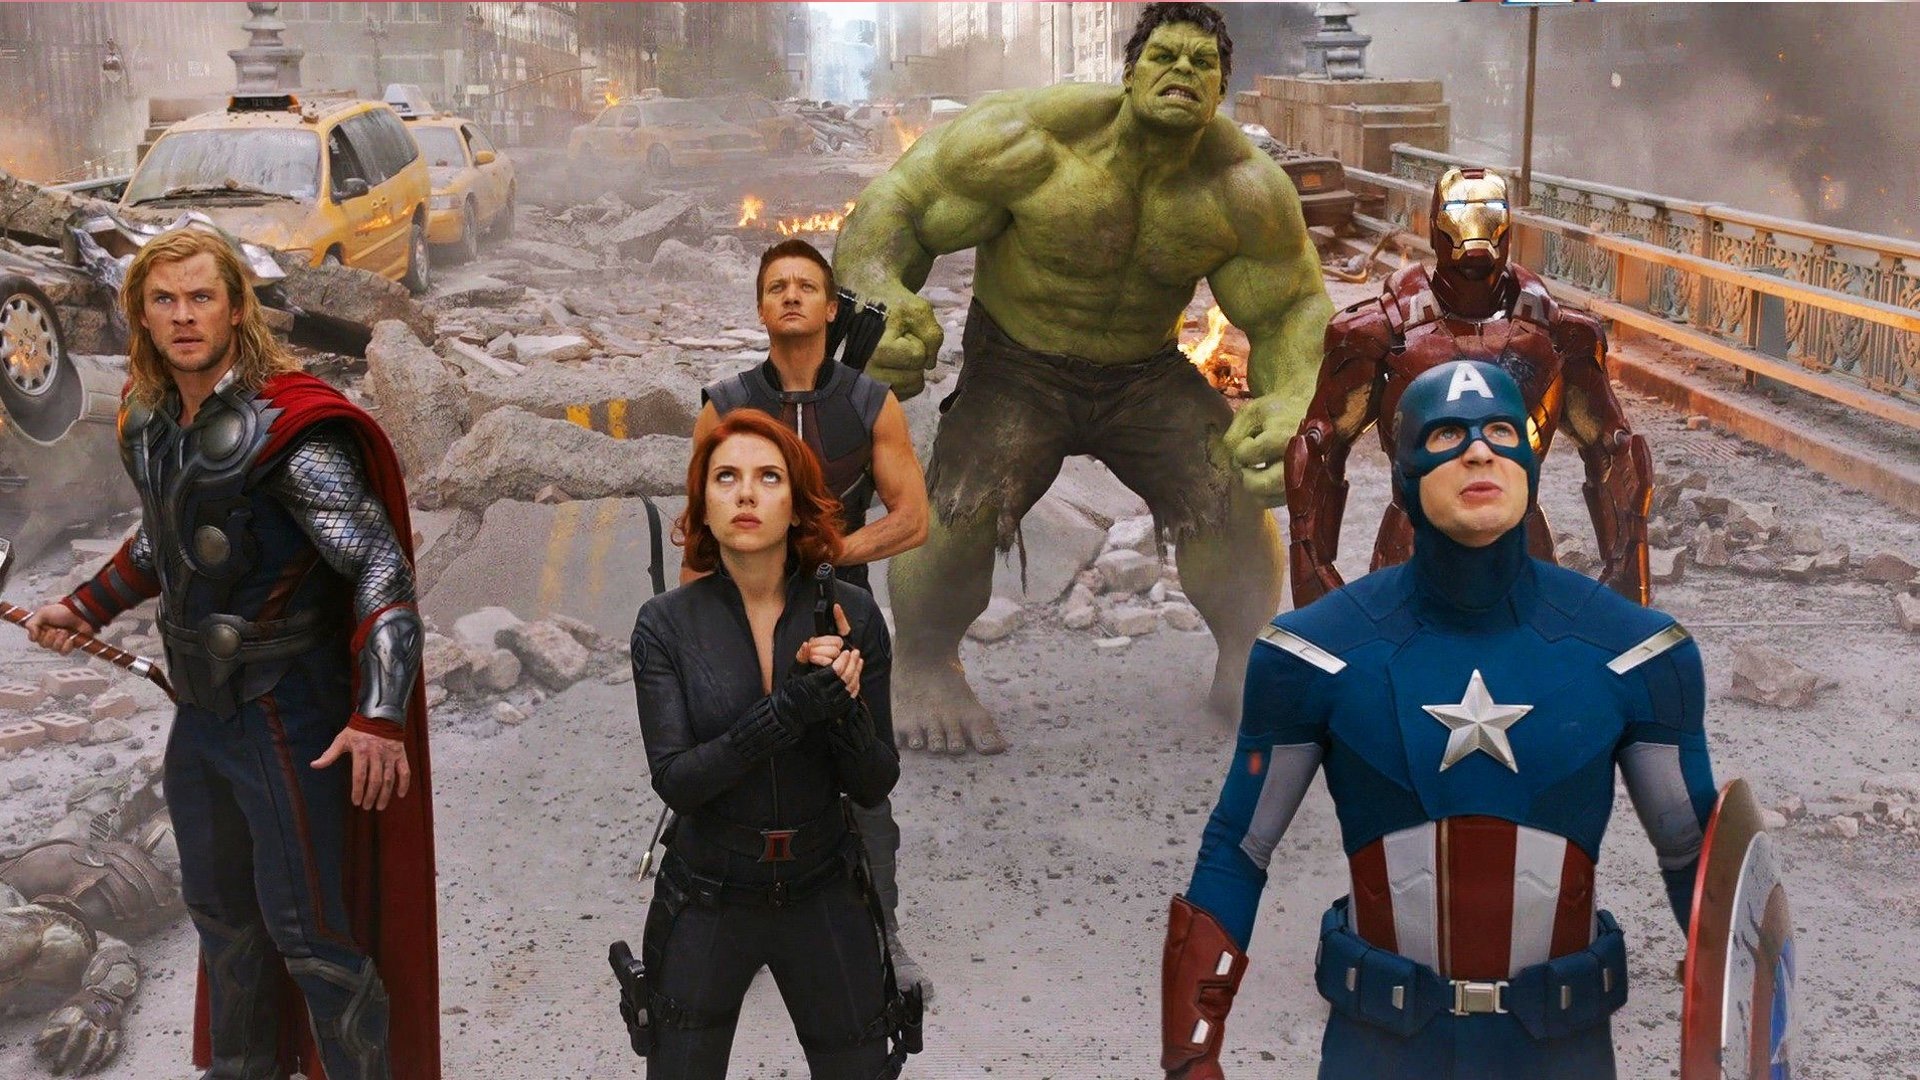 Marvel may revive original Avengers cast including Iron Man and